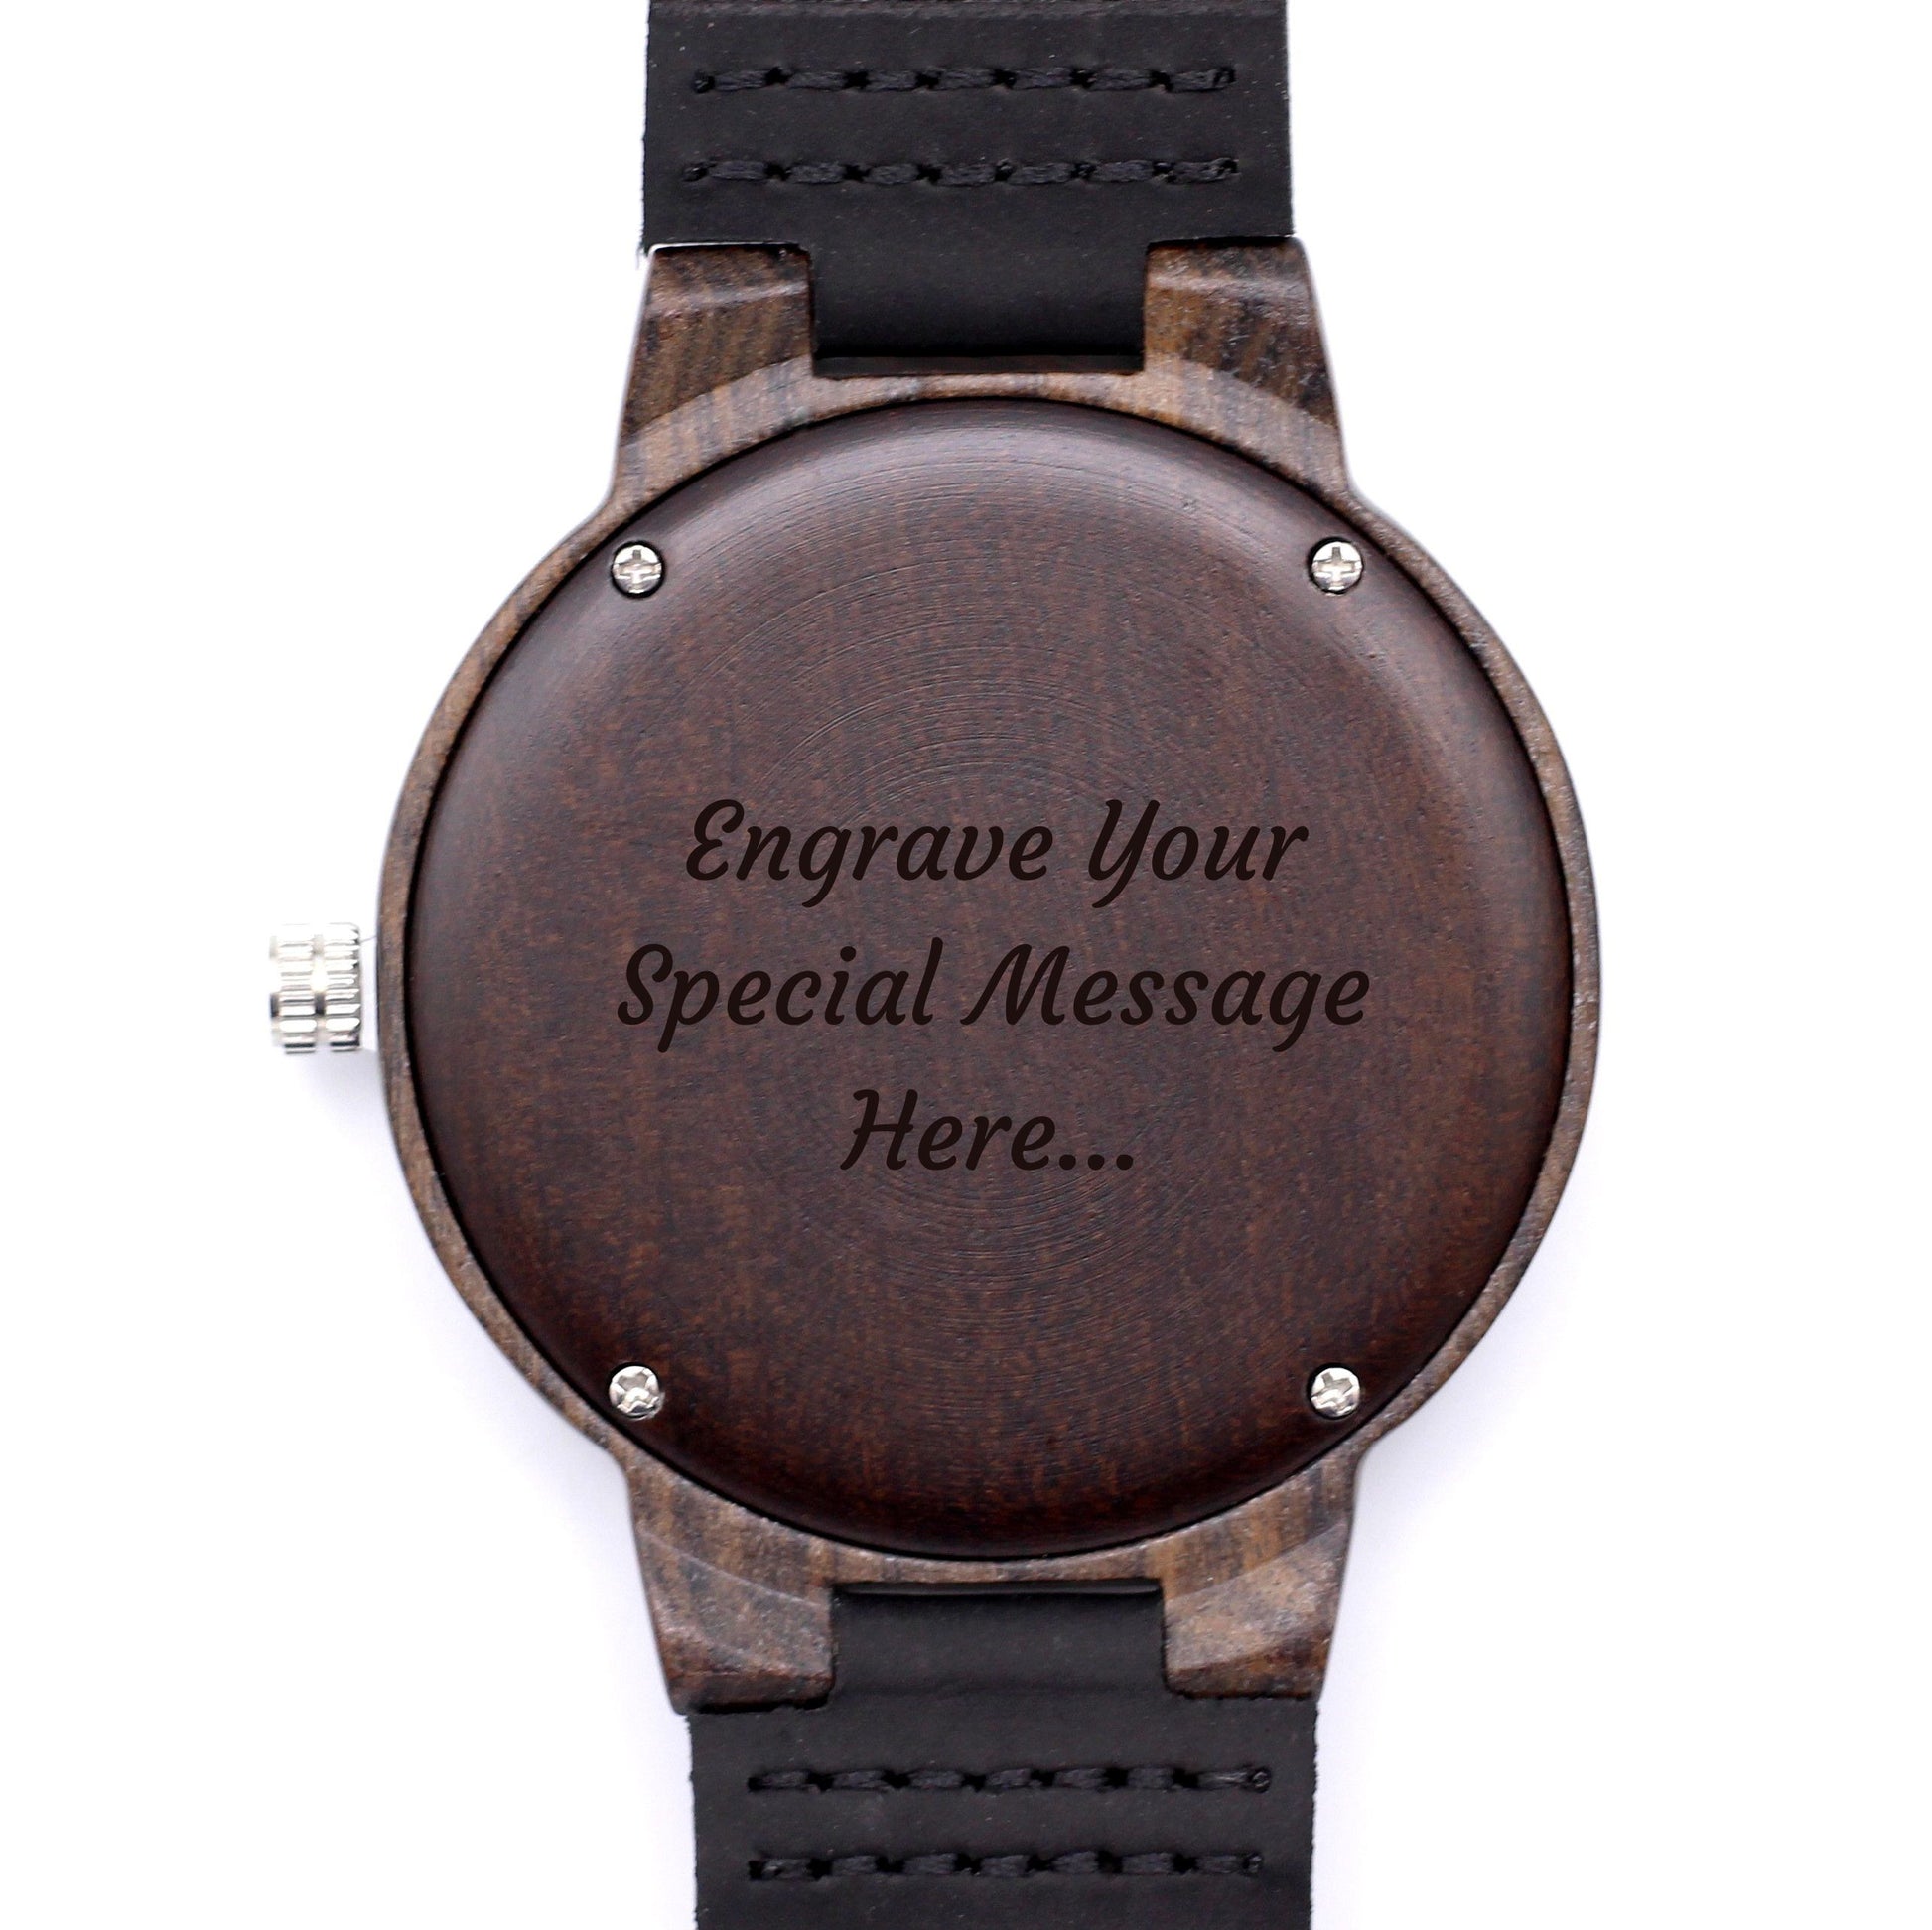 MANLY SPICE Ebony Wooden Watch with Black Leather Strap - Hashtag Bamboo